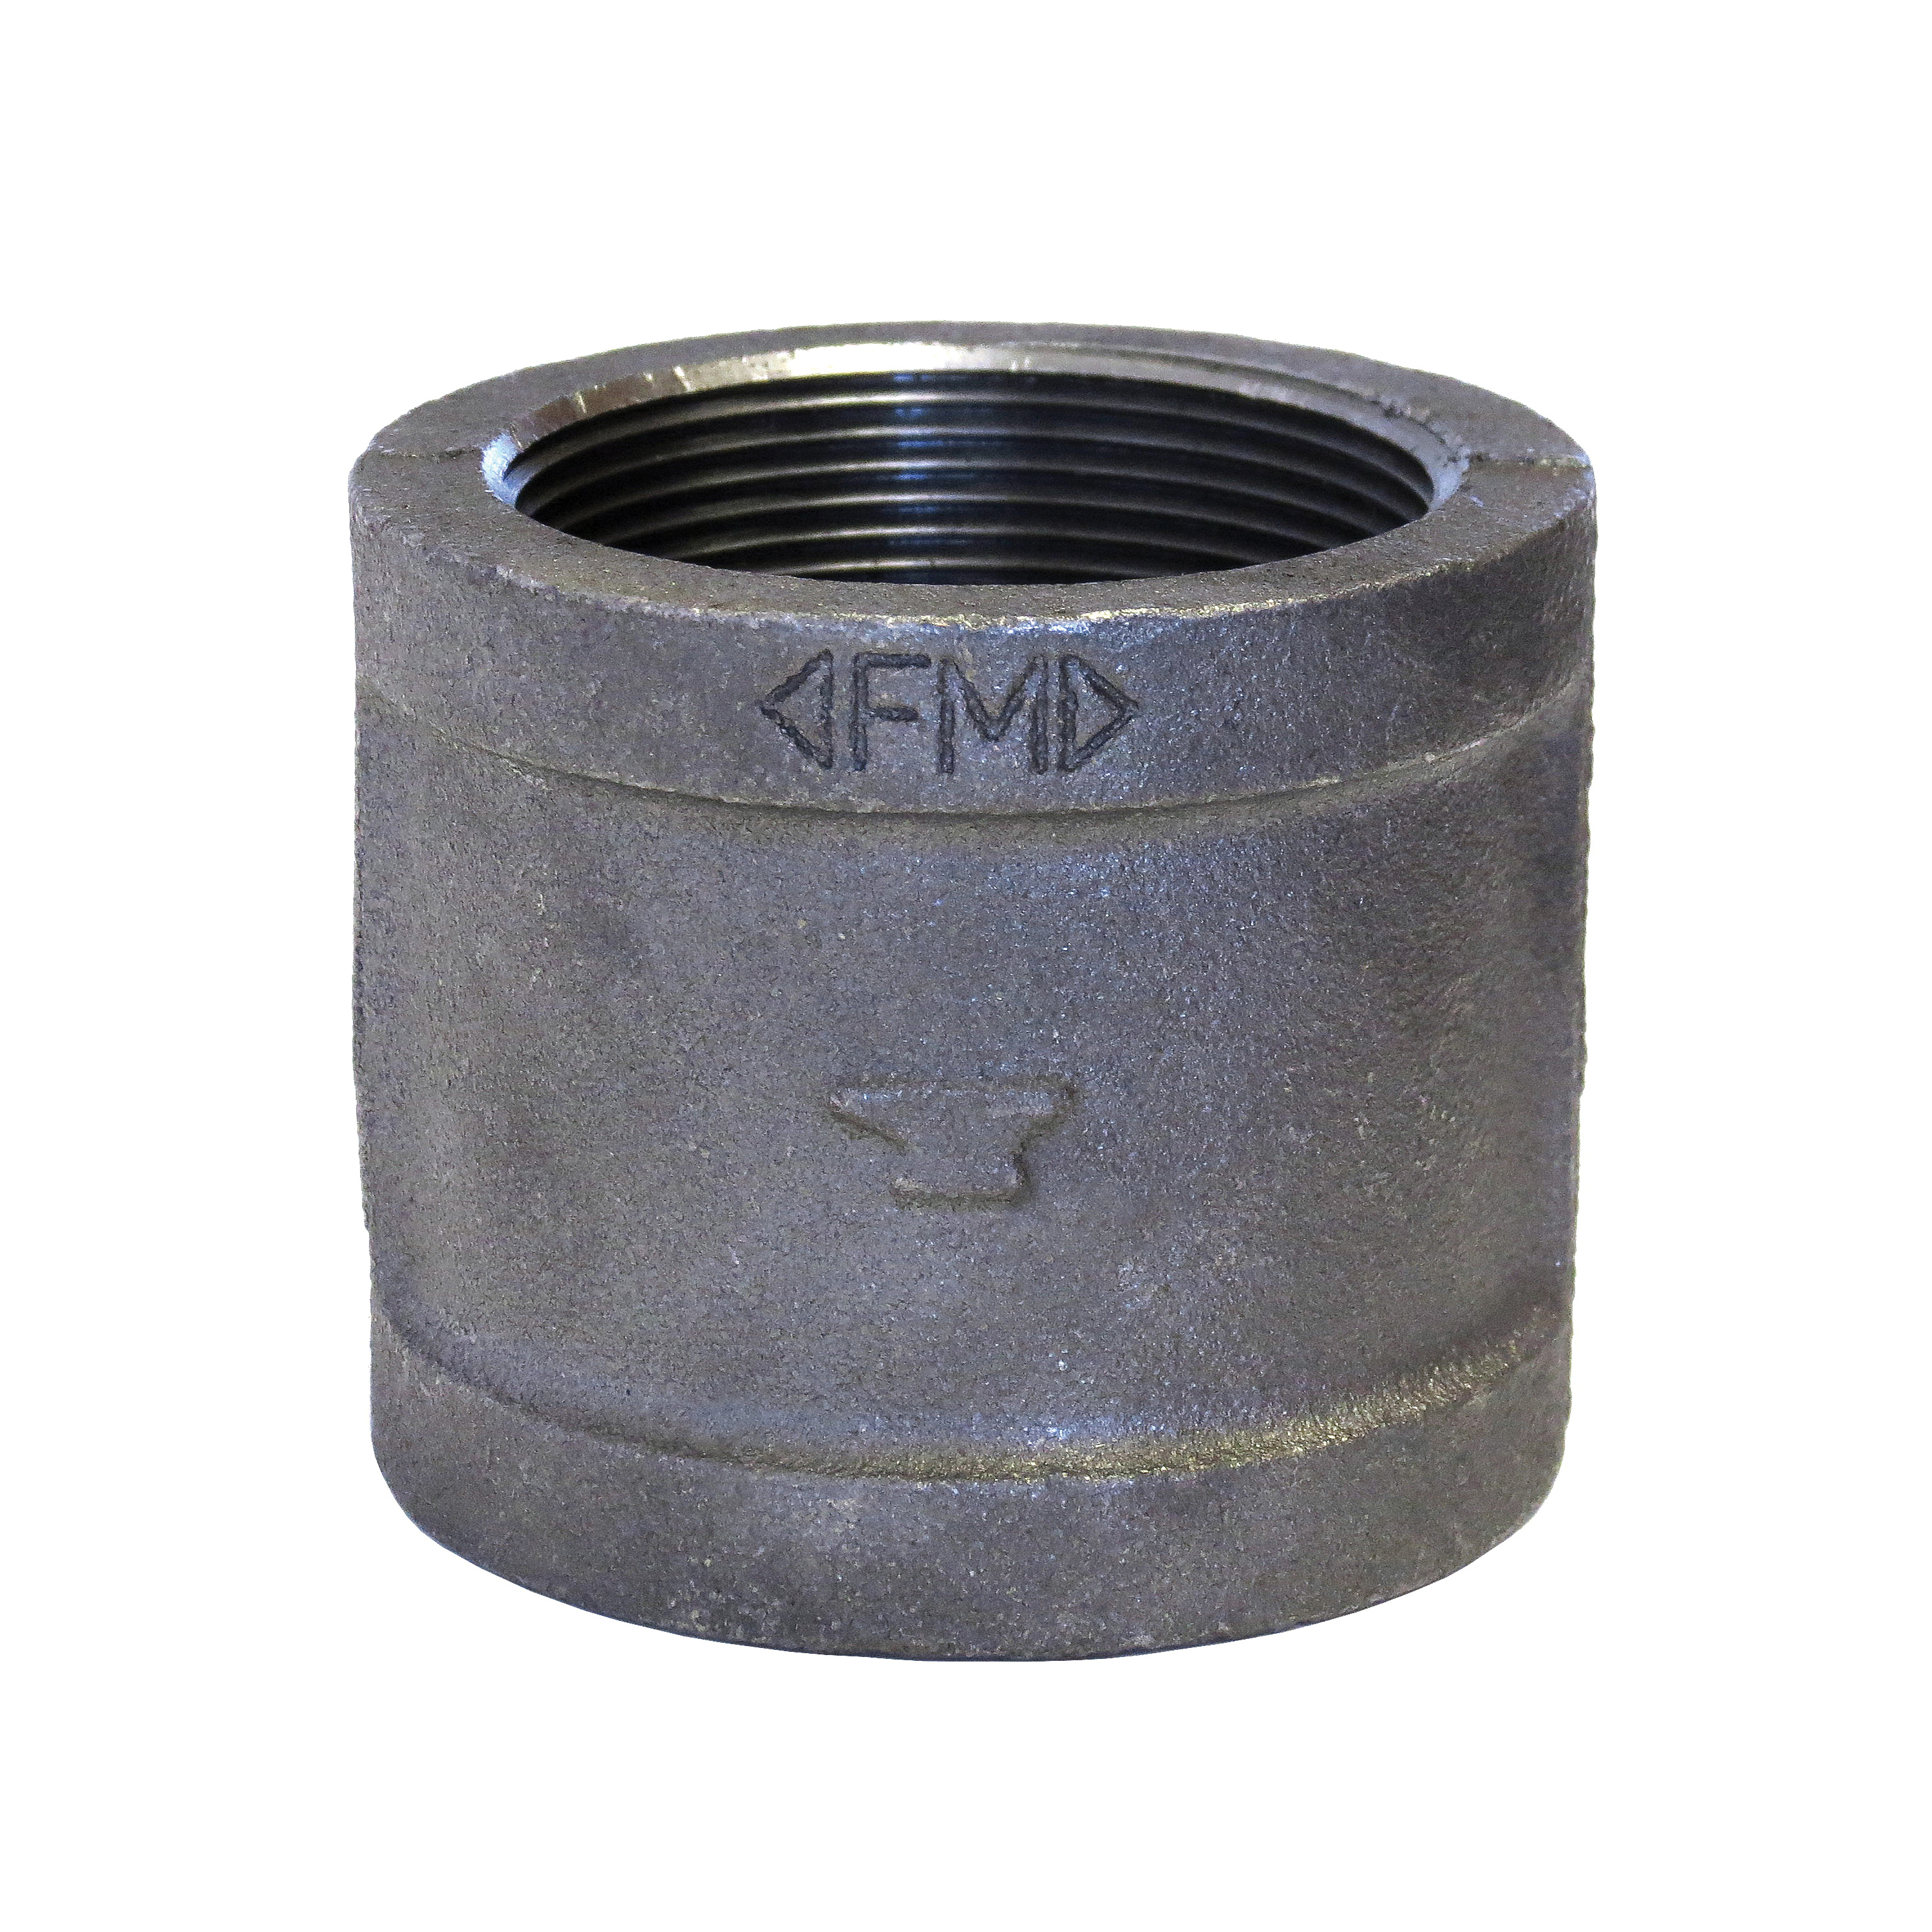 SPF/Anvil™ 0810080408 FIG 3121 Pipe Coupling, 3/4 in Nominal, FNPT End Style, 150 lb, Malleable Iron, Black Oxide, Import